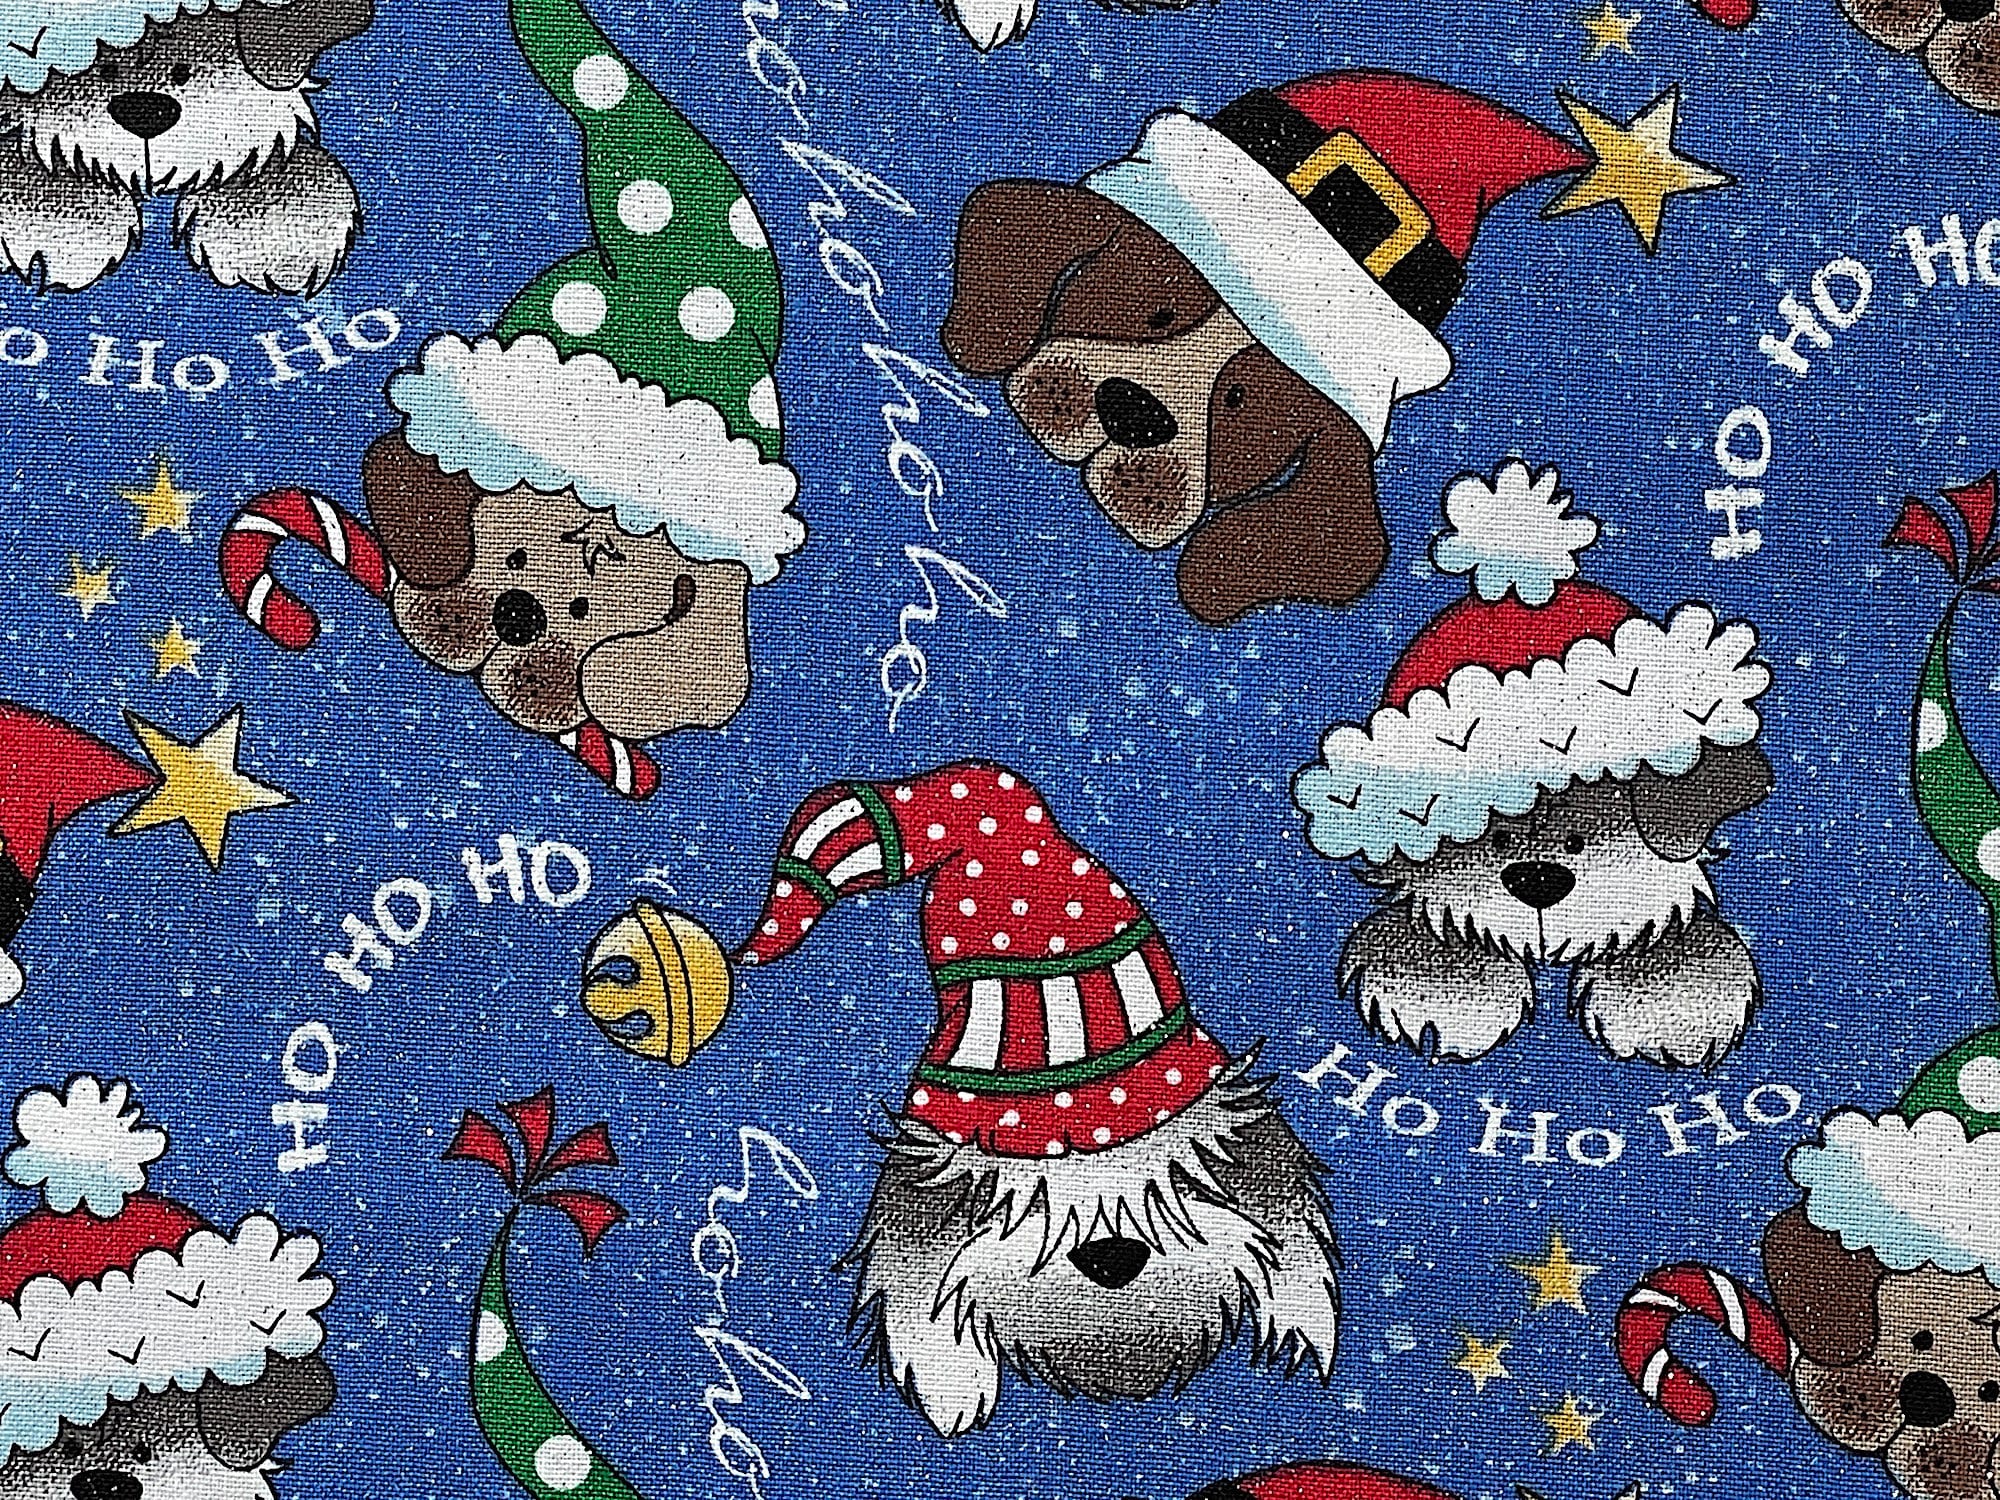 Close up of dogs wearing Santa hats on a blue background.